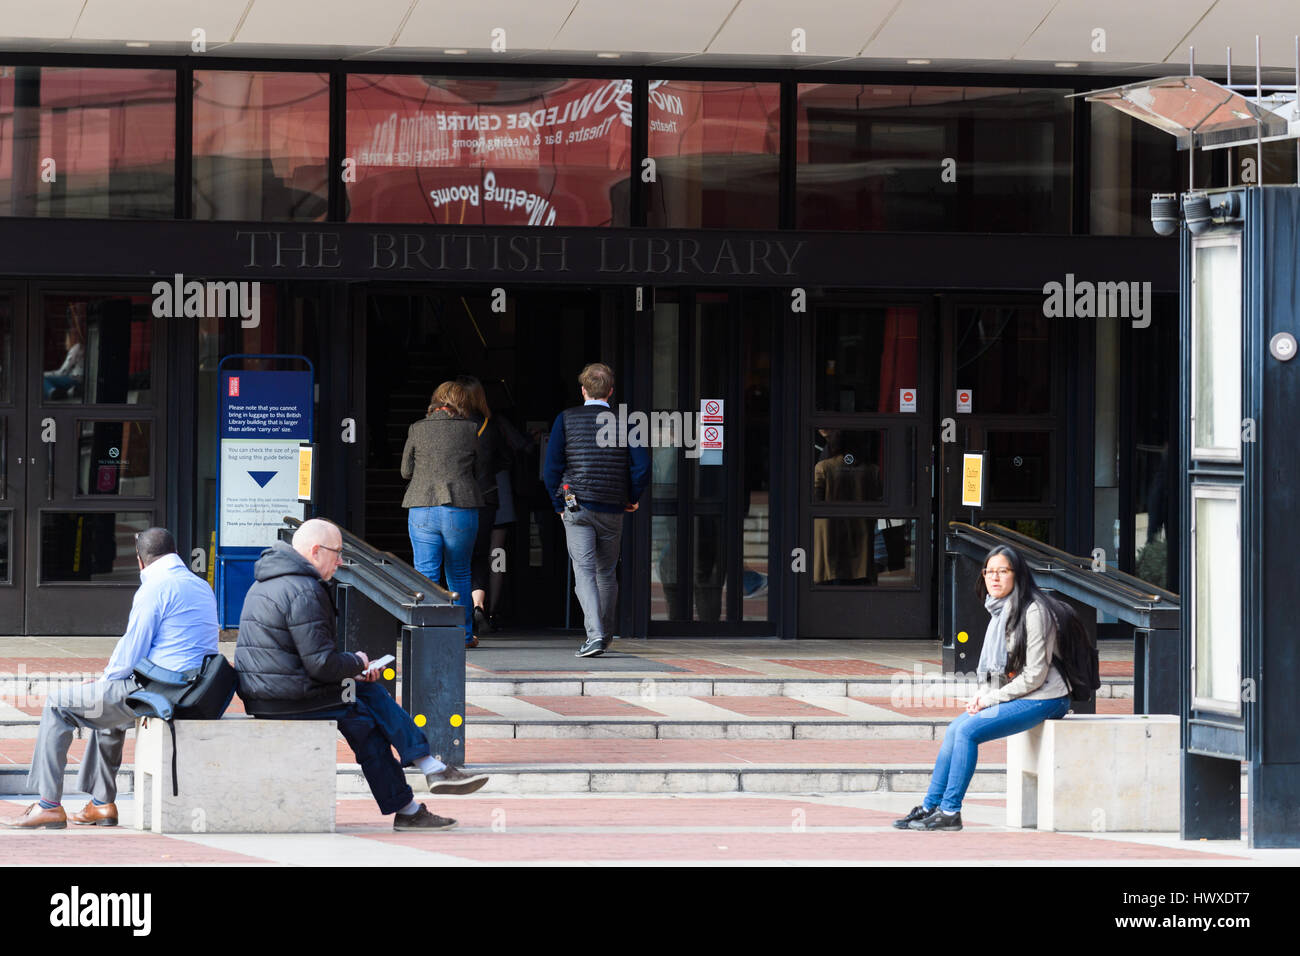 Main entrance to the British library, London. Stock Photo